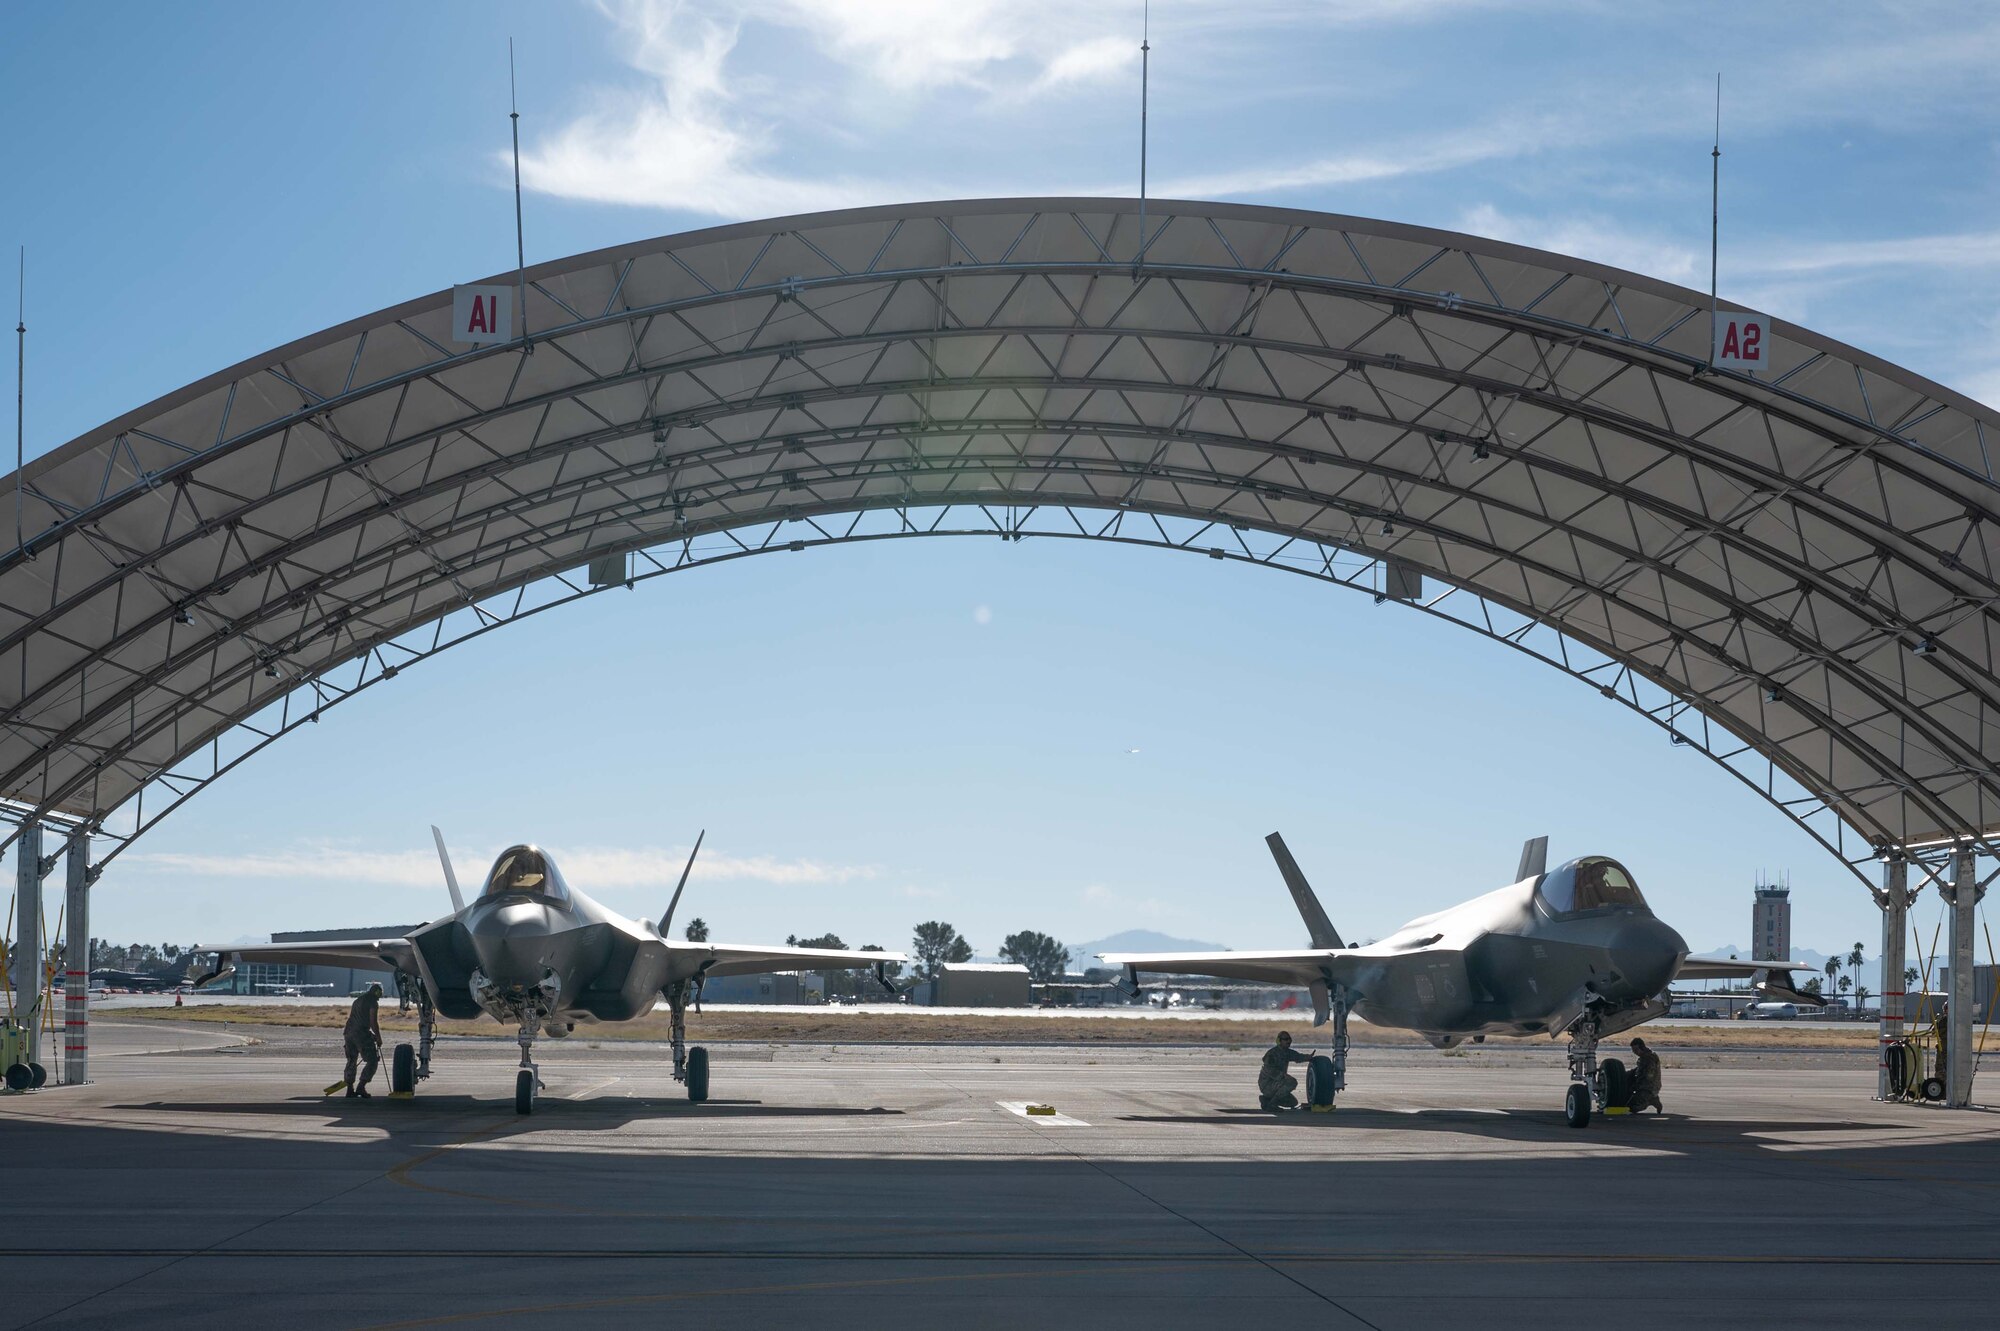 F35A Lighting II fighters made their debut in Tucson this week as two landed at Morris ANG Base, Ariz., for a meeting amongst leaders from the 56th Fighter Wing from Luke Air Force and the 162nd Wing here in Tucson. (U.S. Air National Guard photo by Maj. Angela Walz)